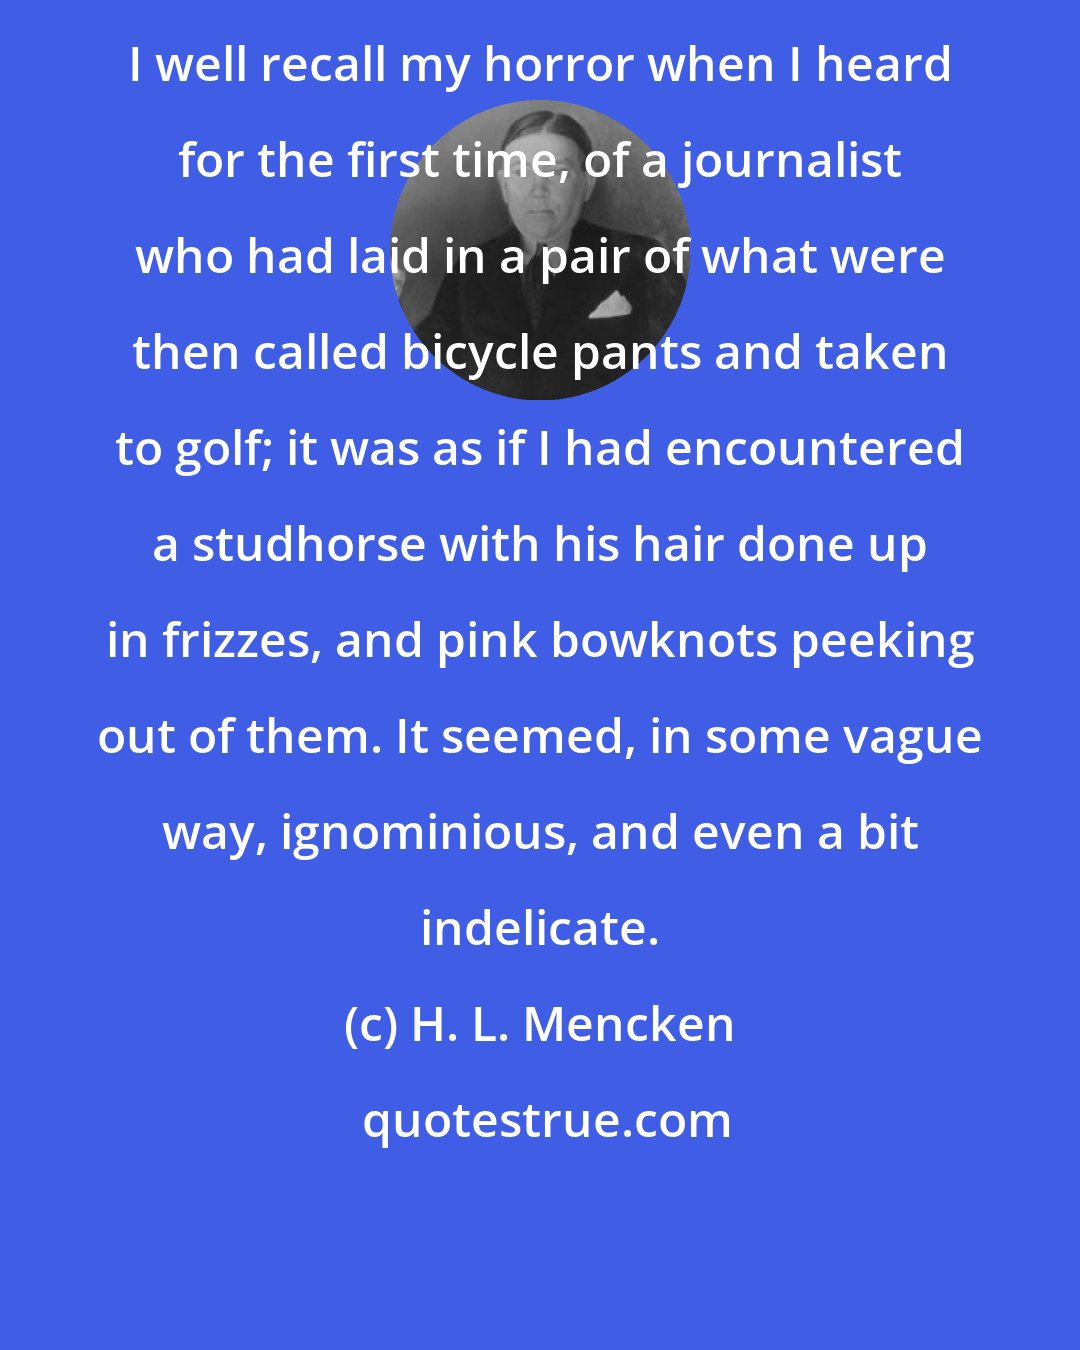 H. L. Mencken: I well recall my horror when I heard for the first time, of a journalist who had laid in a pair of what were then called bicycle pants and taken to golf; it was as if I had encountered a studhorse with his hair done up in frizzes, and pink bowknots peeking out of them. It seemed, in some vague way, ignominious, and even a bit indelicate.